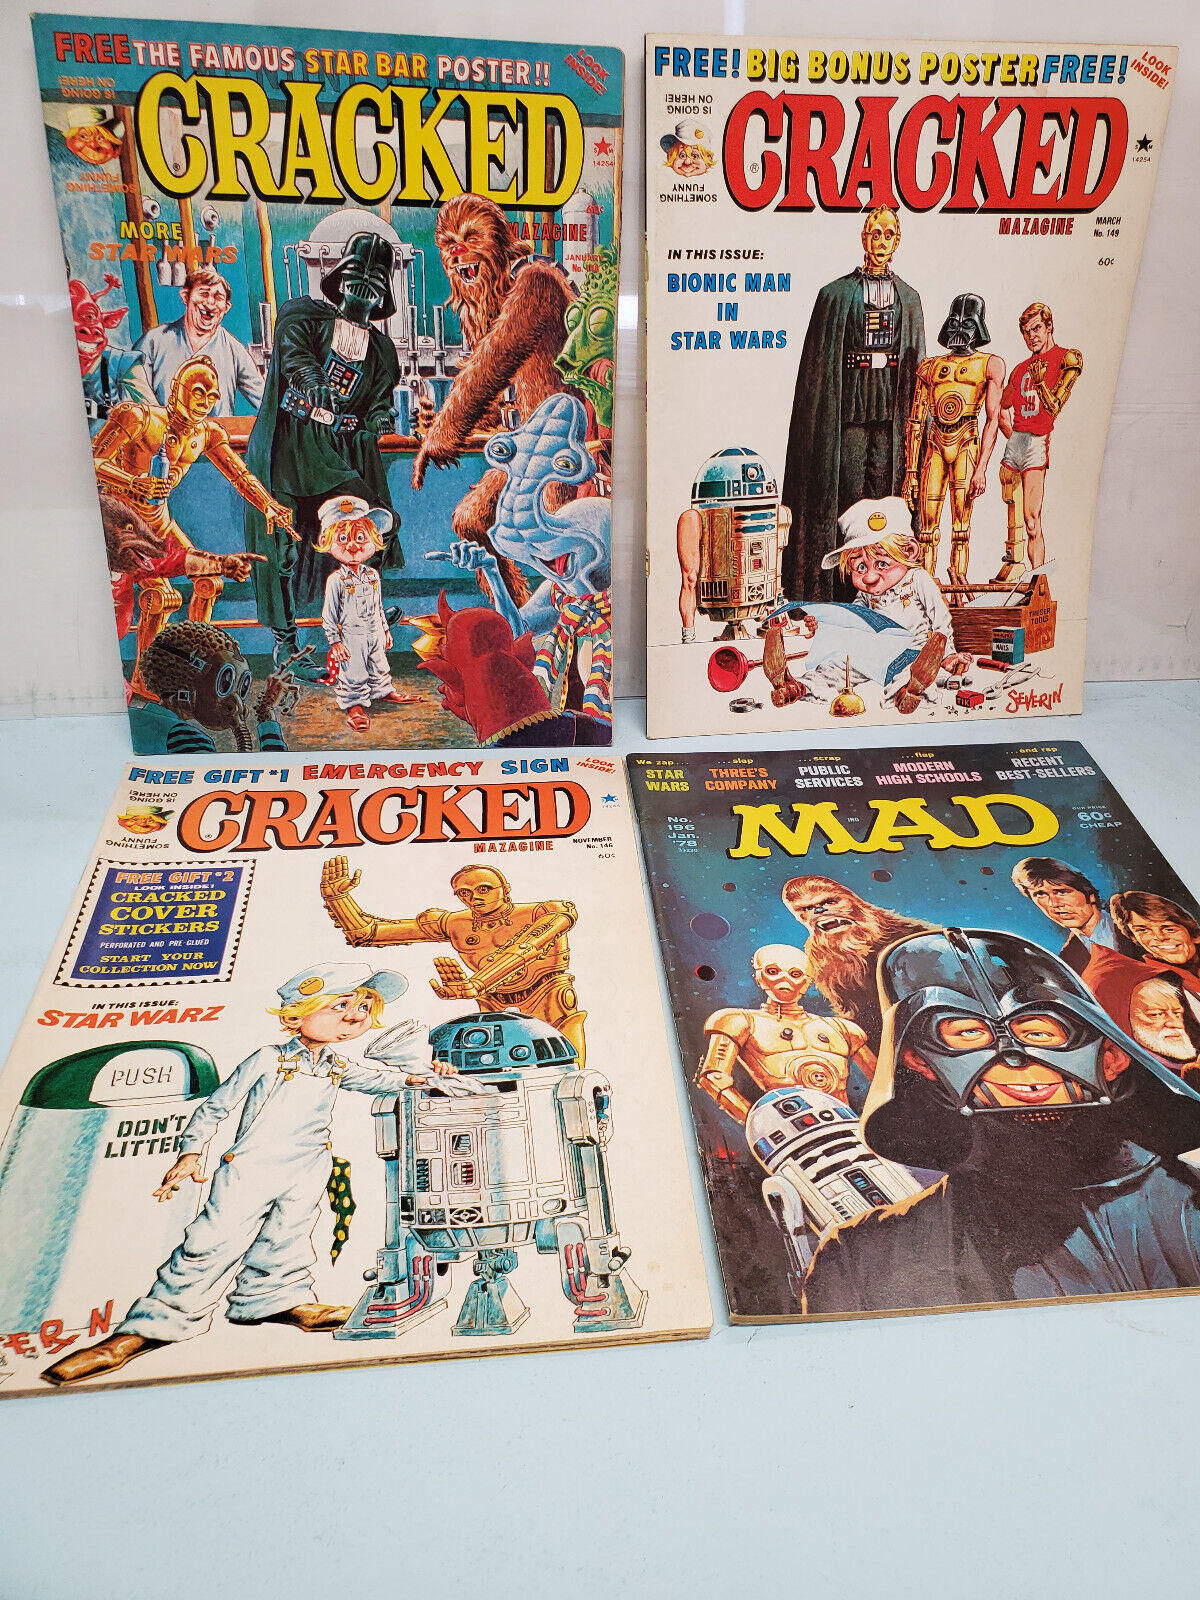 Lot of 4 Cracked and Mad Magazines featuring Star Wars